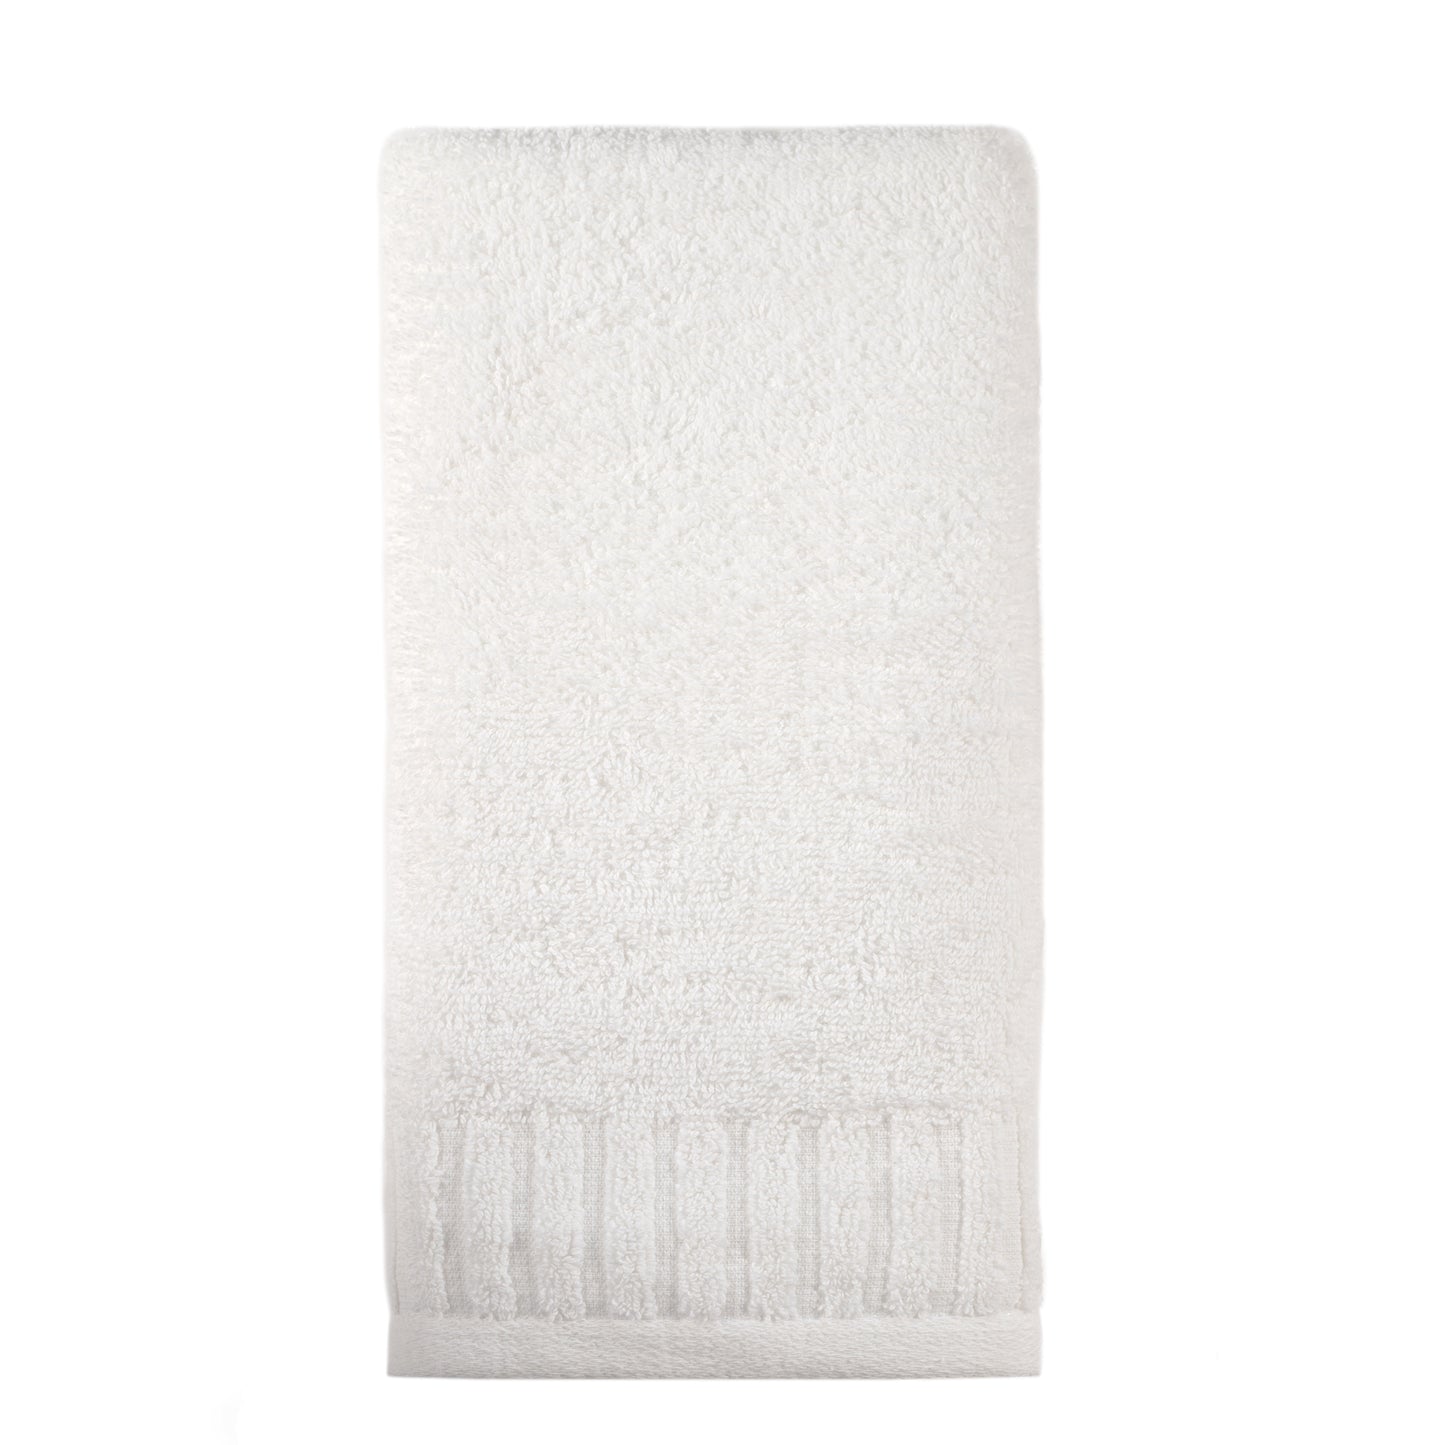 Grand Piano Key™ Hotel Towel Collection